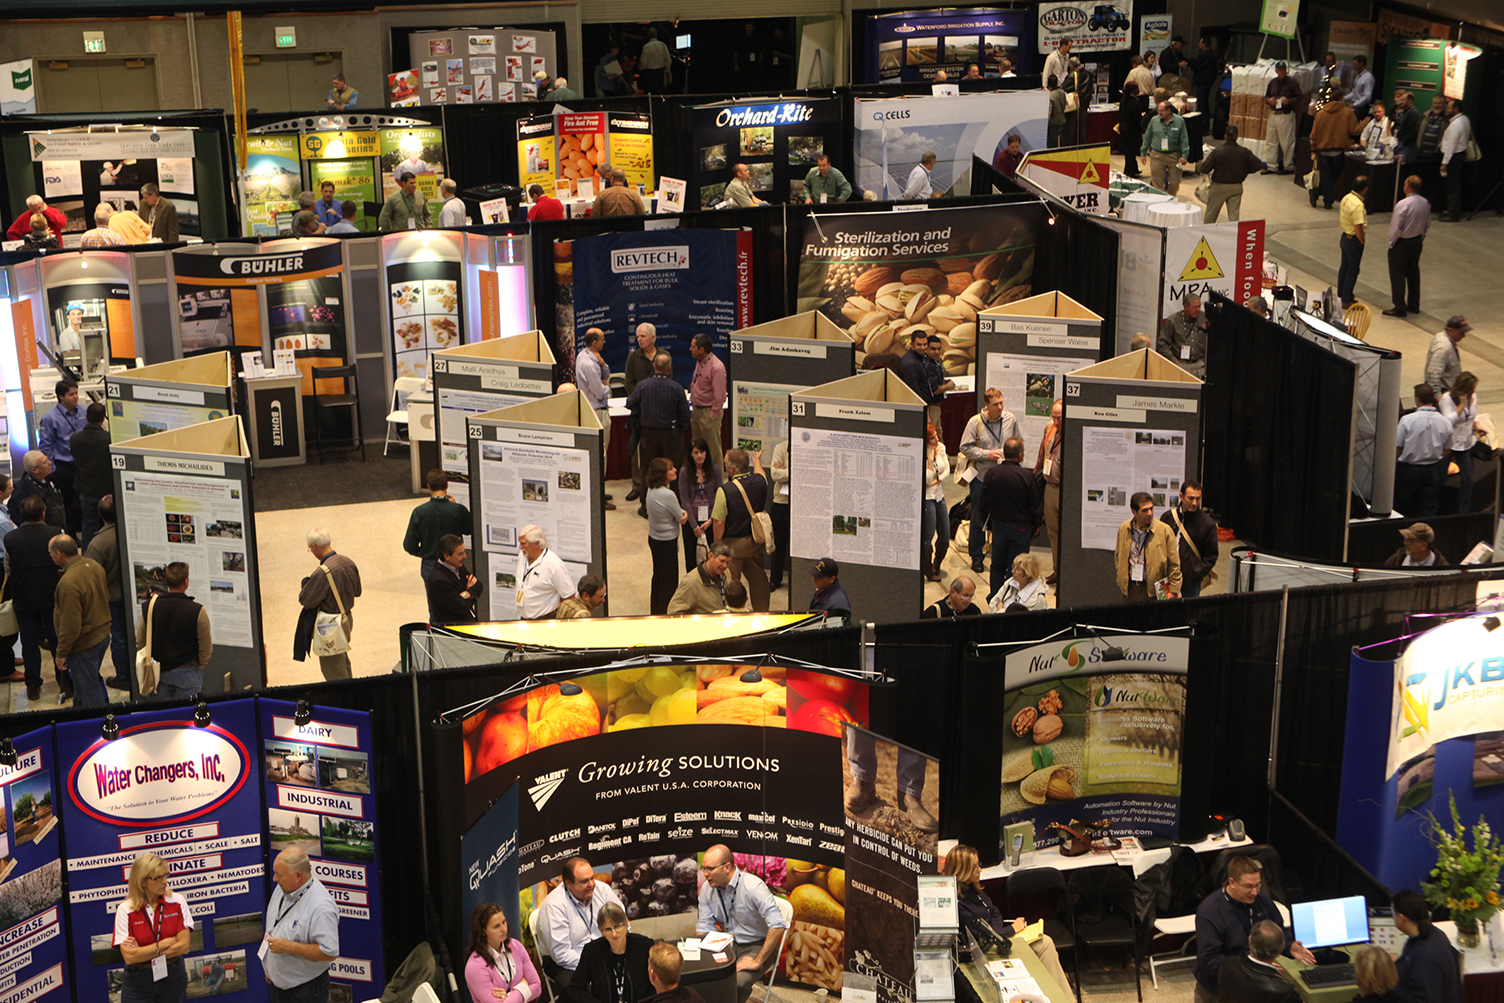 Exhibit floor at the Almond Conference 